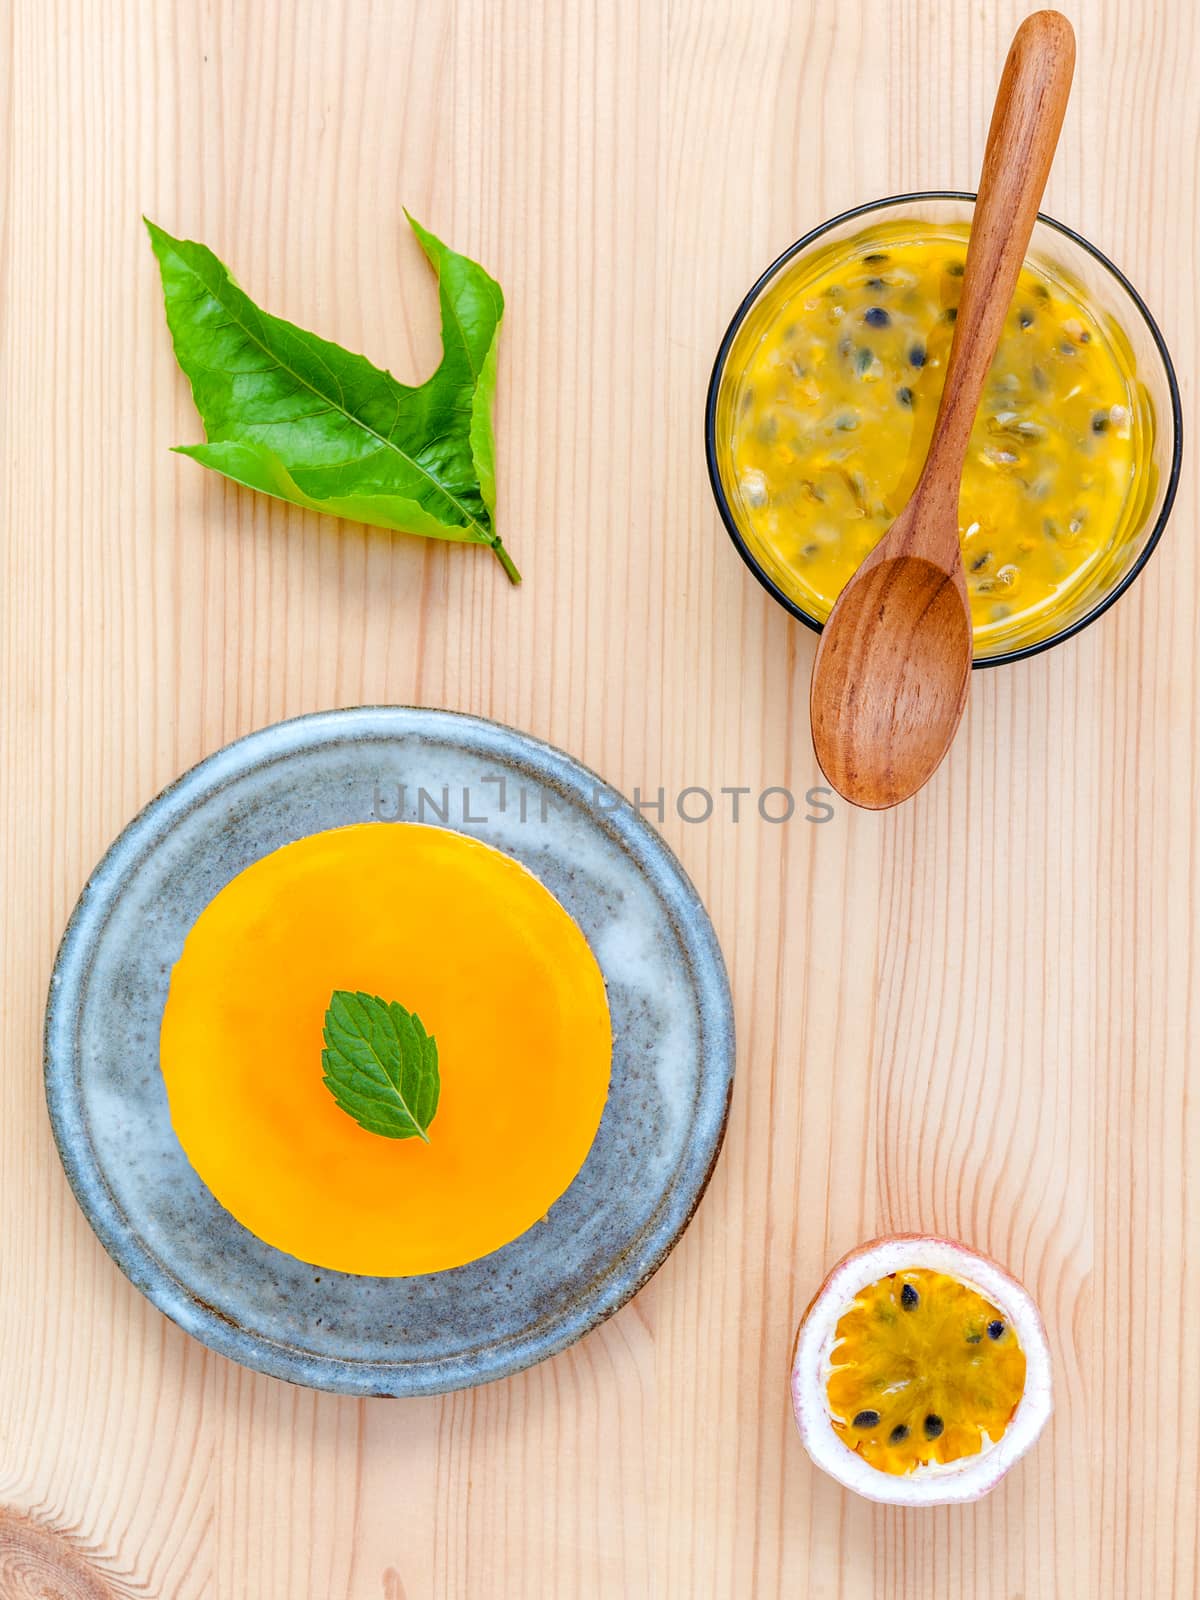 Passion fruit cheesecake with fresh mint leaves on wooden backgr by kerdkanno